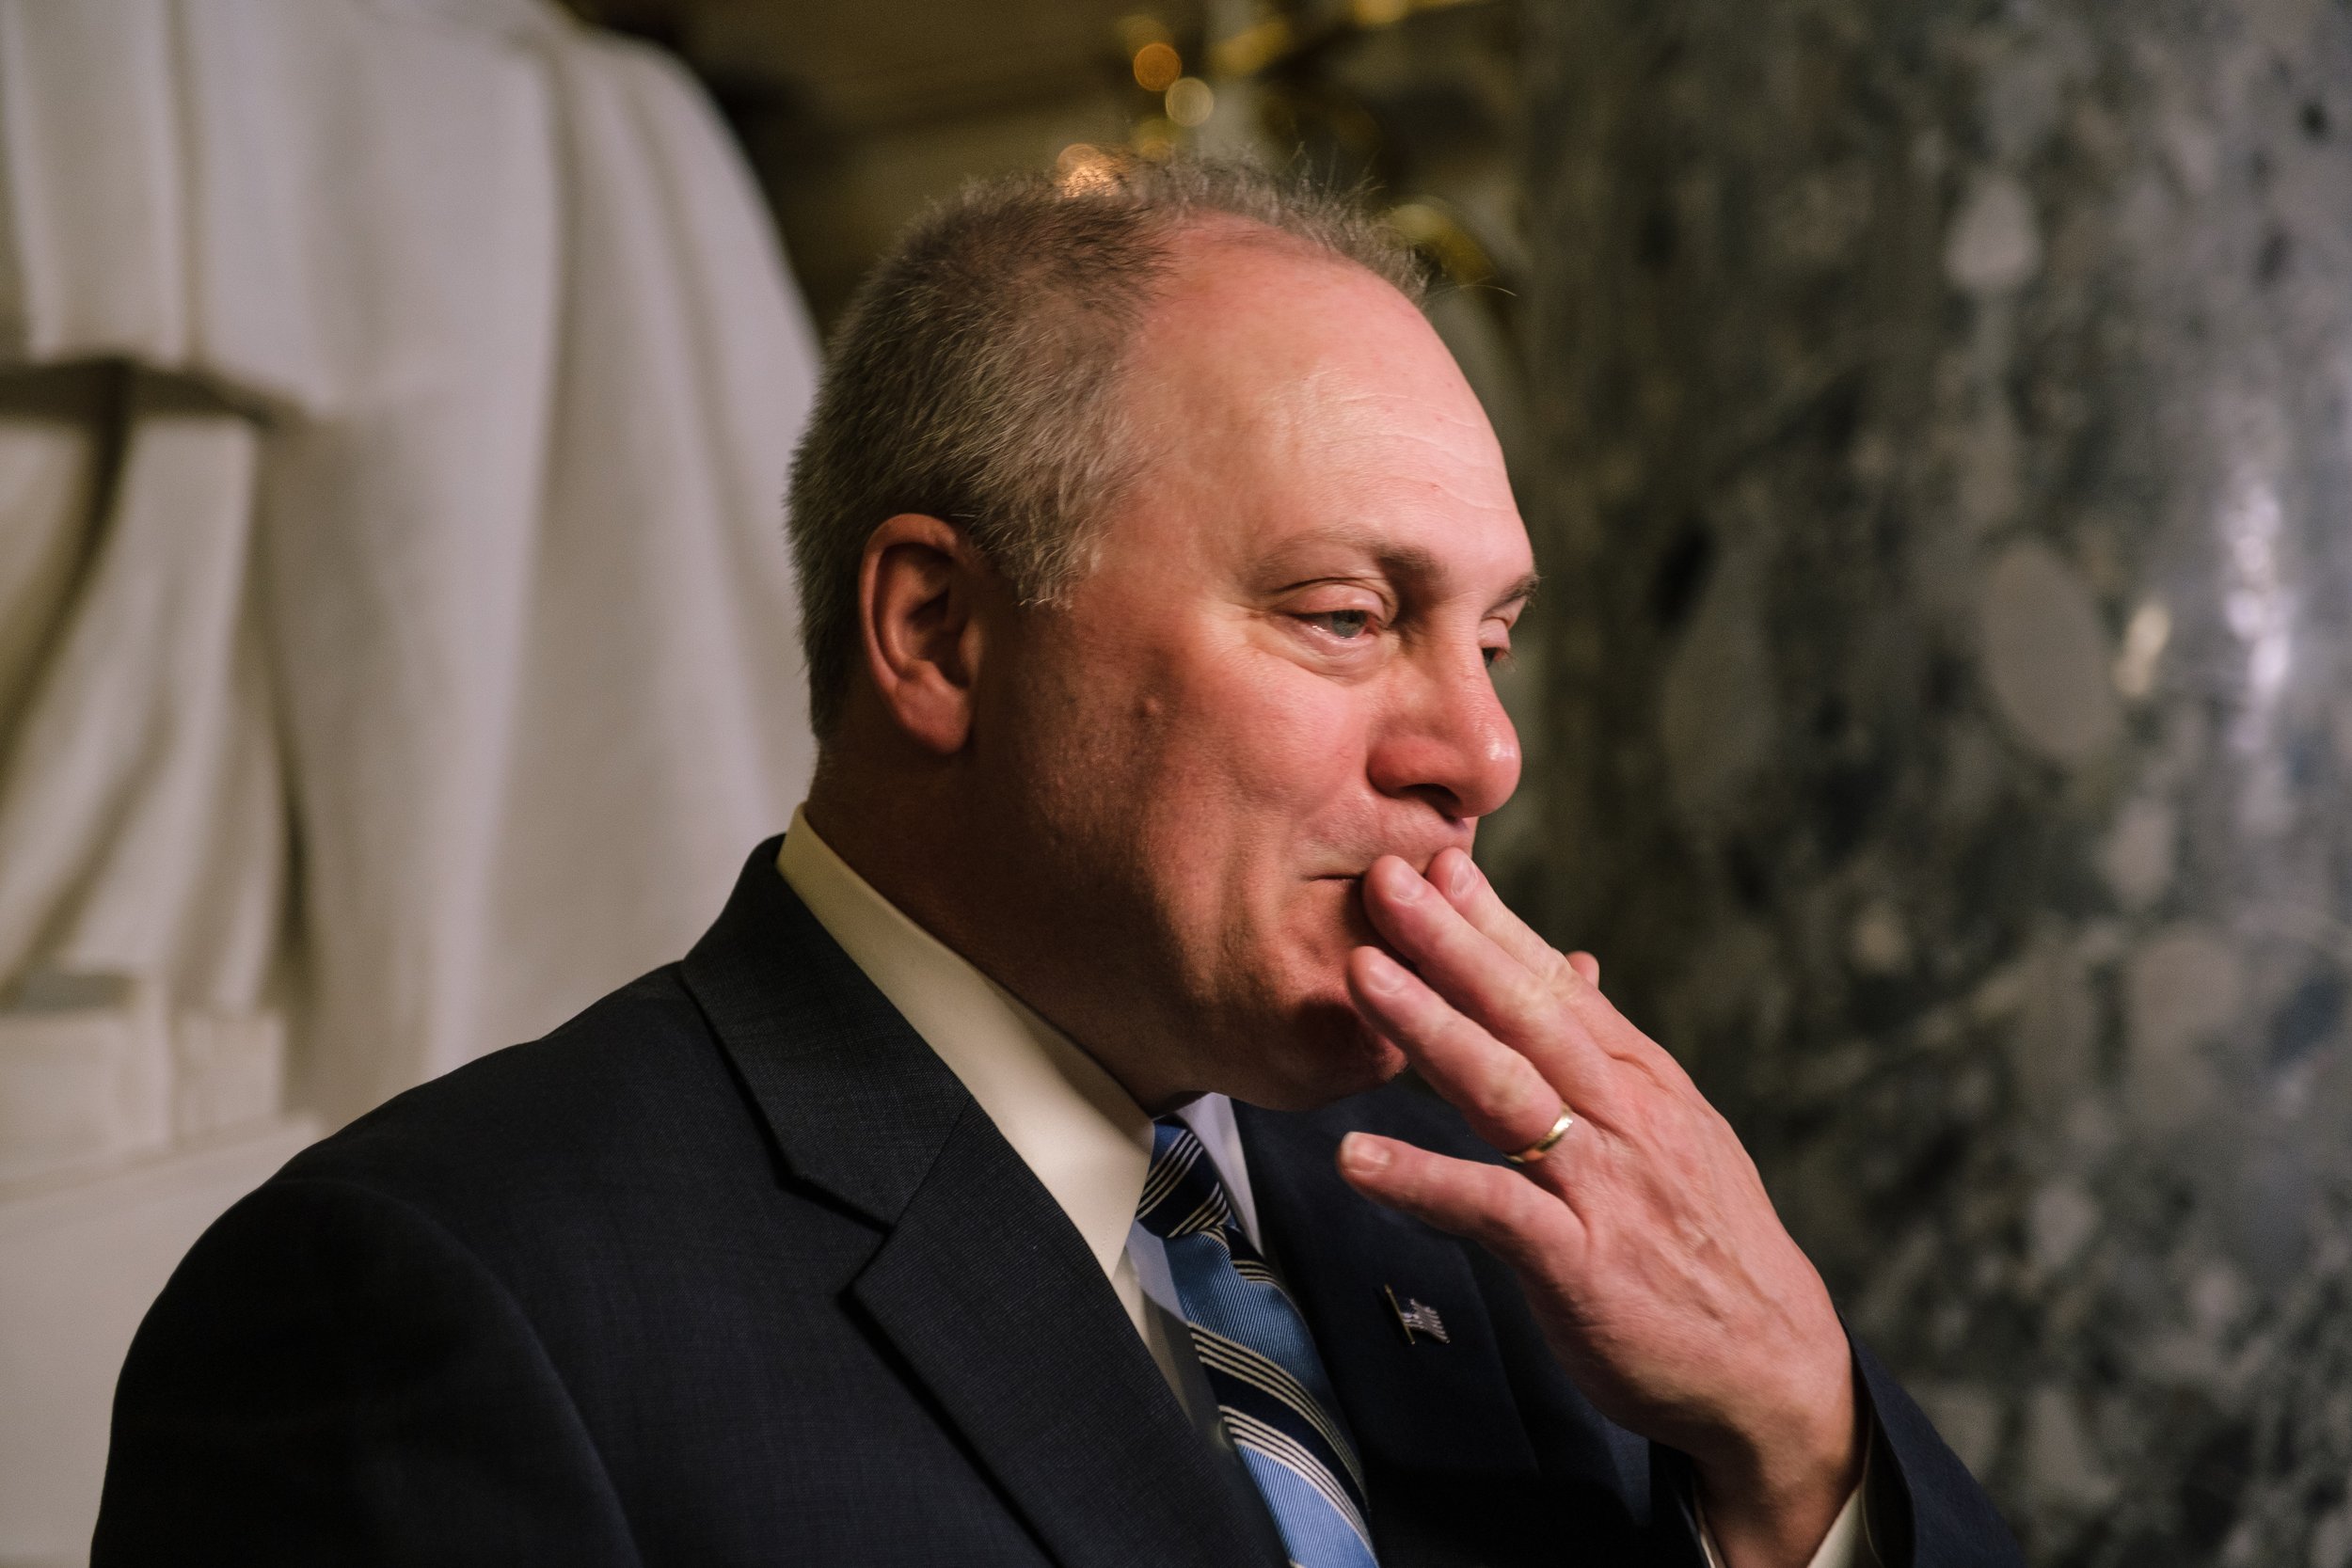  Rep. Steve Scalise (R-LA) becomes emotional while recounting his recovery years after being shot in the hip during a congressional baseball practice.    January 2019   